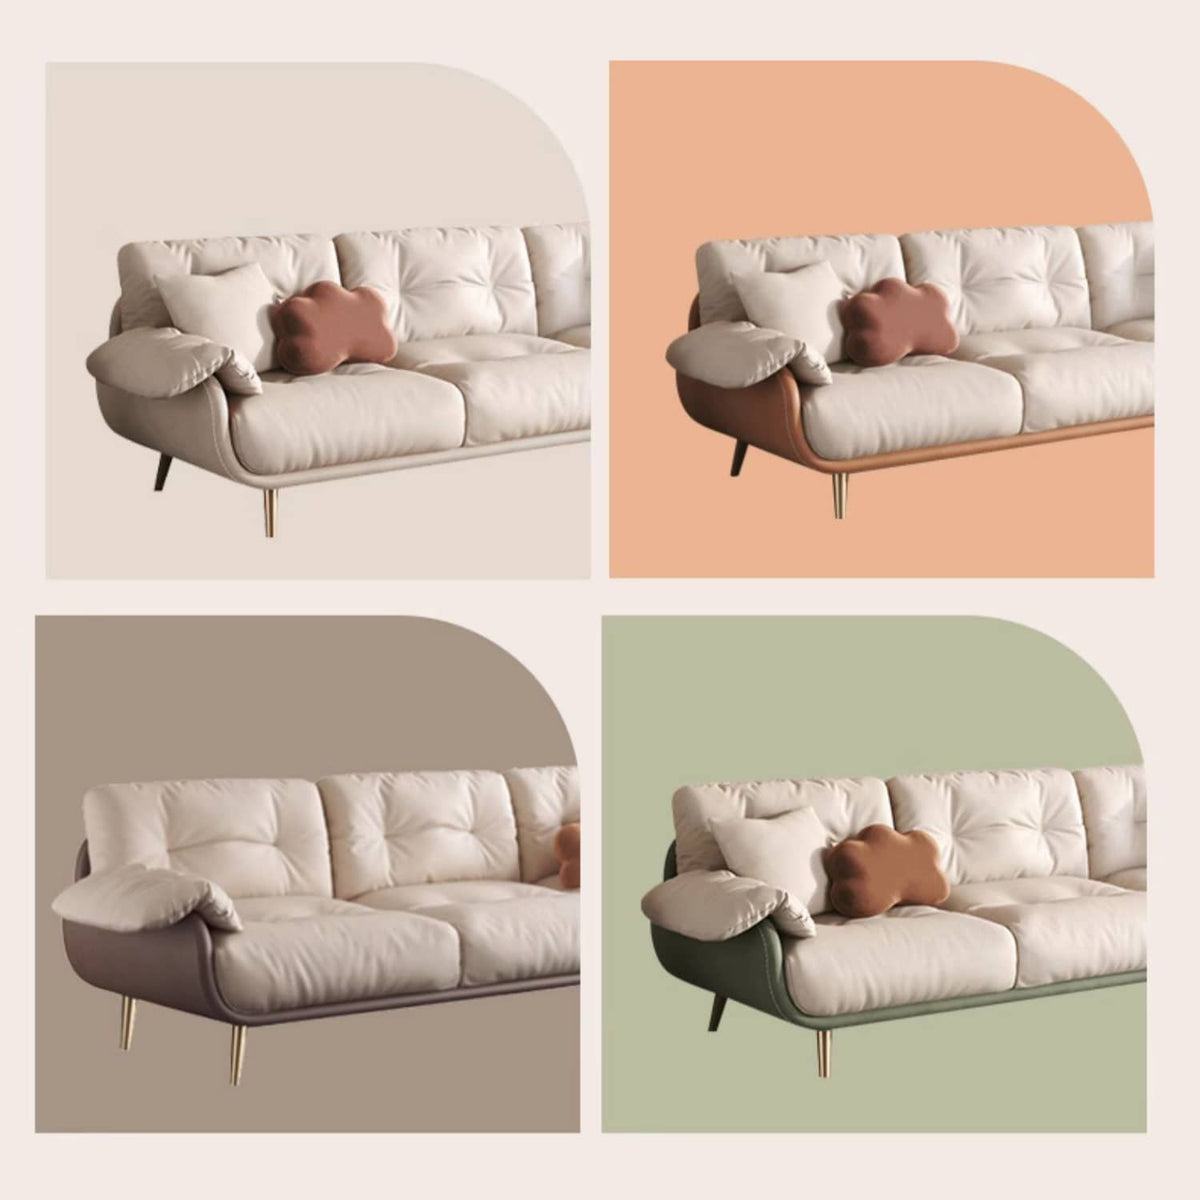 Luxurious Modern Sofa with Beige, Orange, Green, and Brown Accents - Solid Wood Frame and Stainless Steel Details - Premium Down and Cotton Blend Upholstery and Leathaire Finish fbby-1407